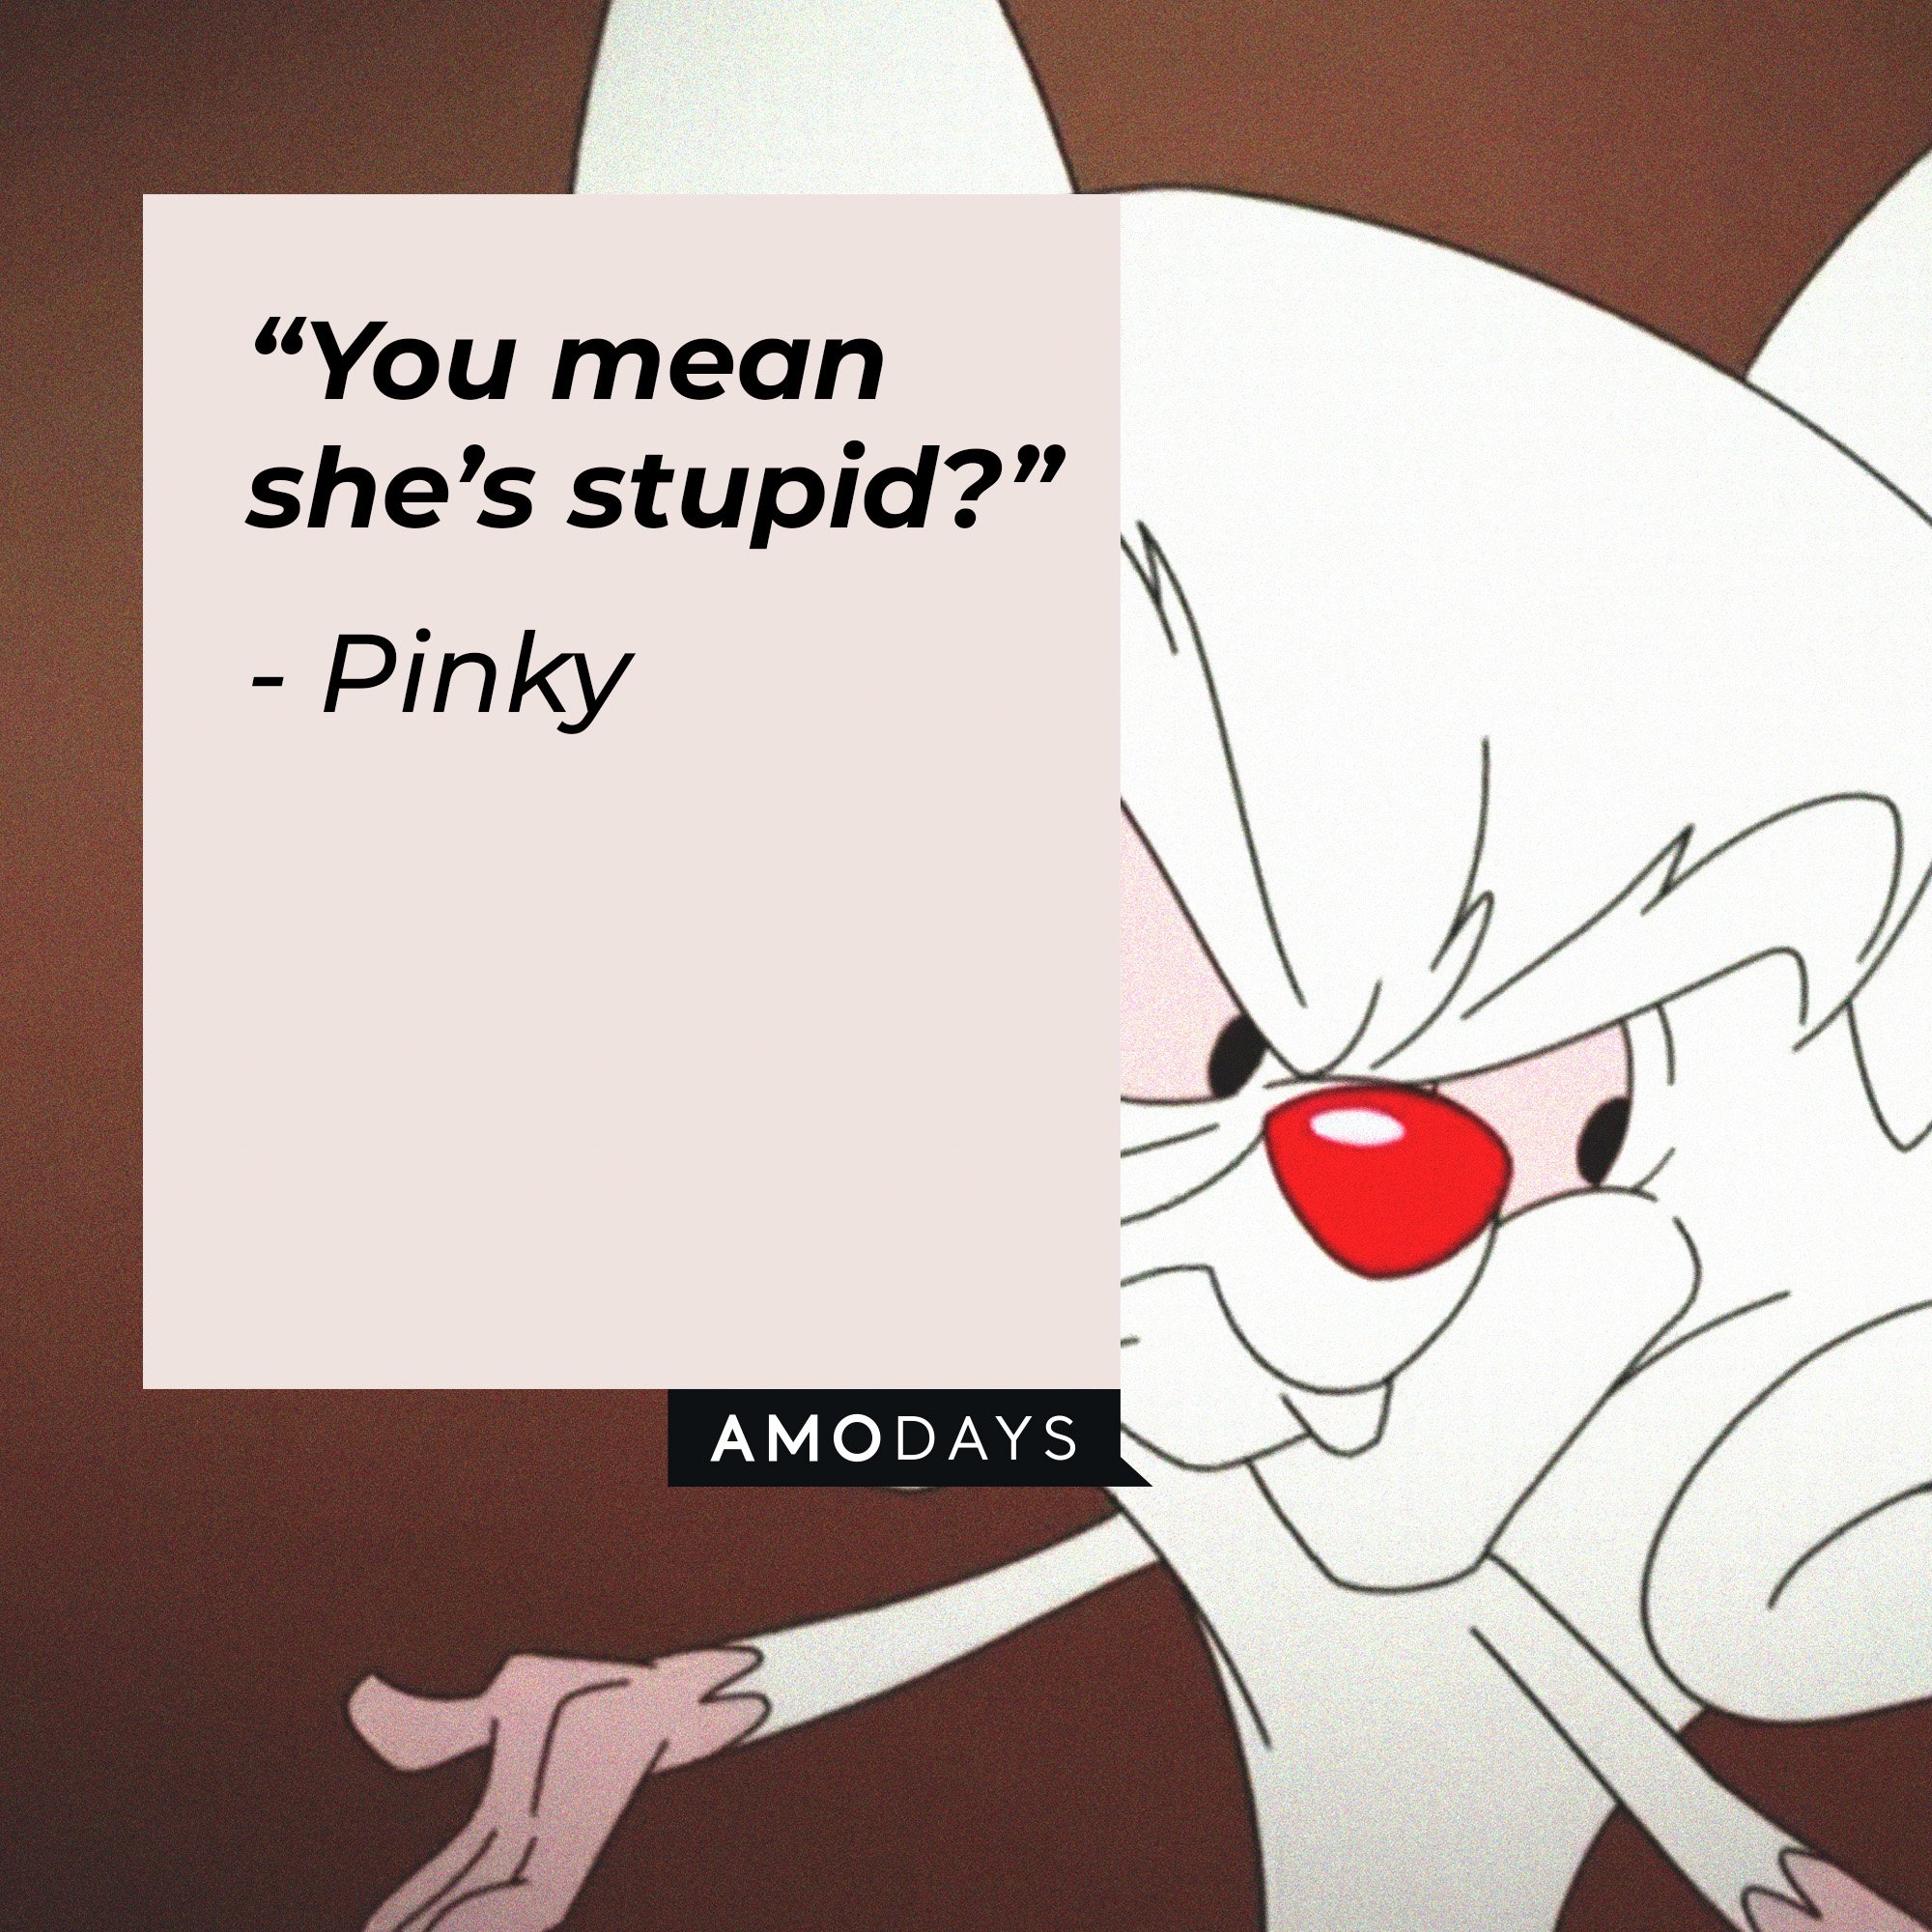 Pinky's quote: “You mean she’s stupid?” | Image: AmoDays